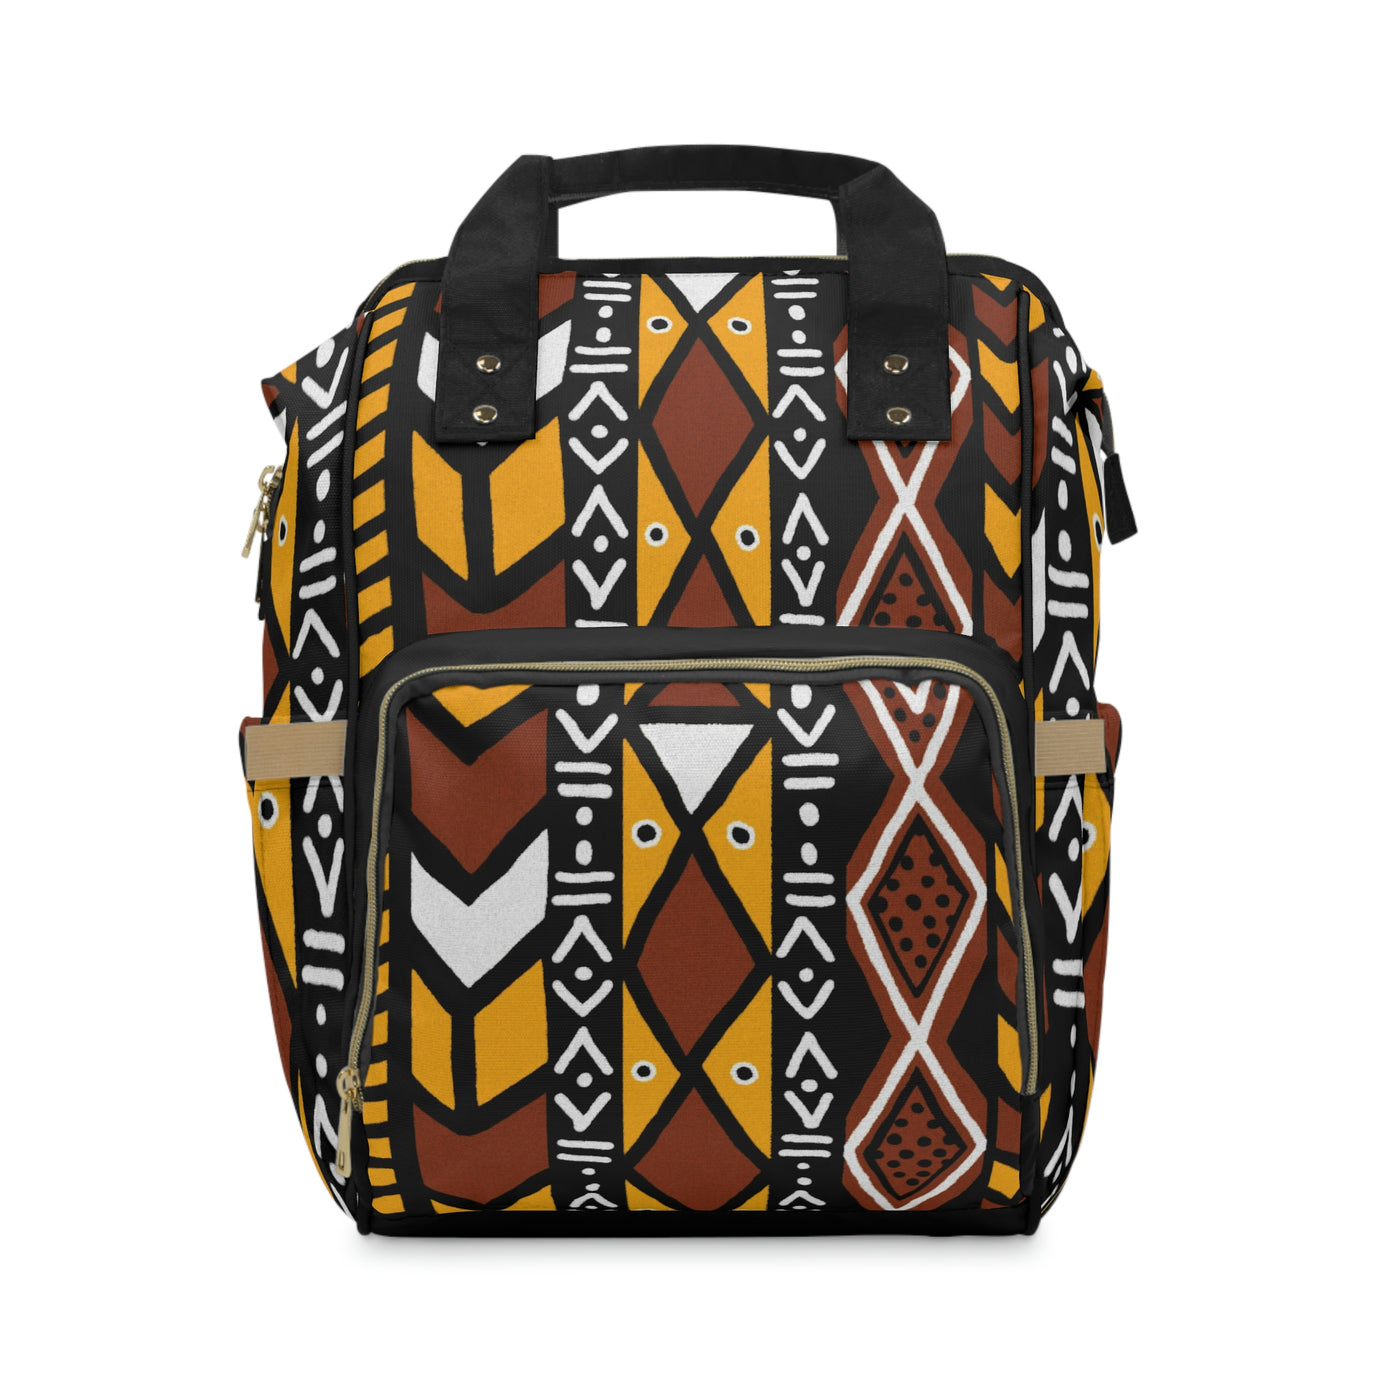 Mudcloth Pattern Mixed Yellow and Brown Diaper Bag